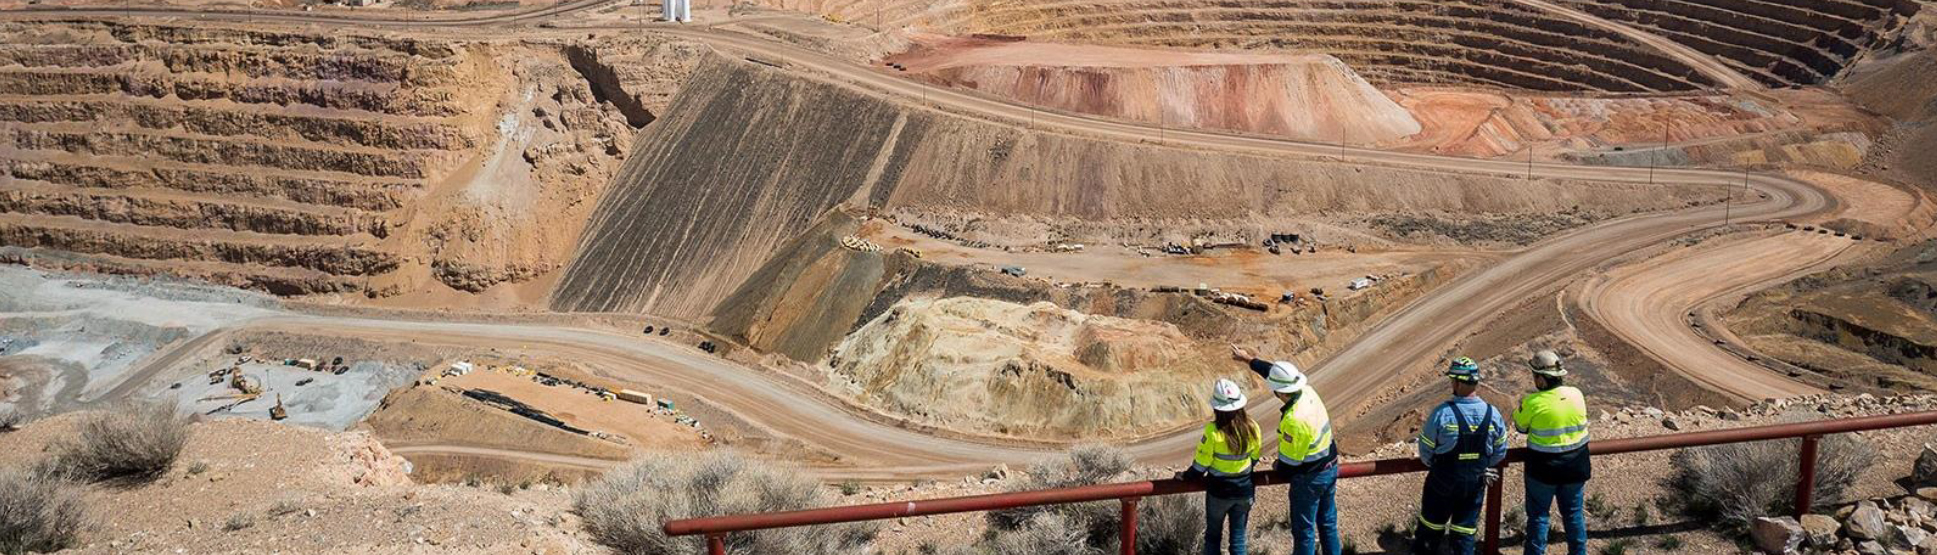 Nevada Gold Mines is operated by Barrick, a sector-leading gold and copper producer.